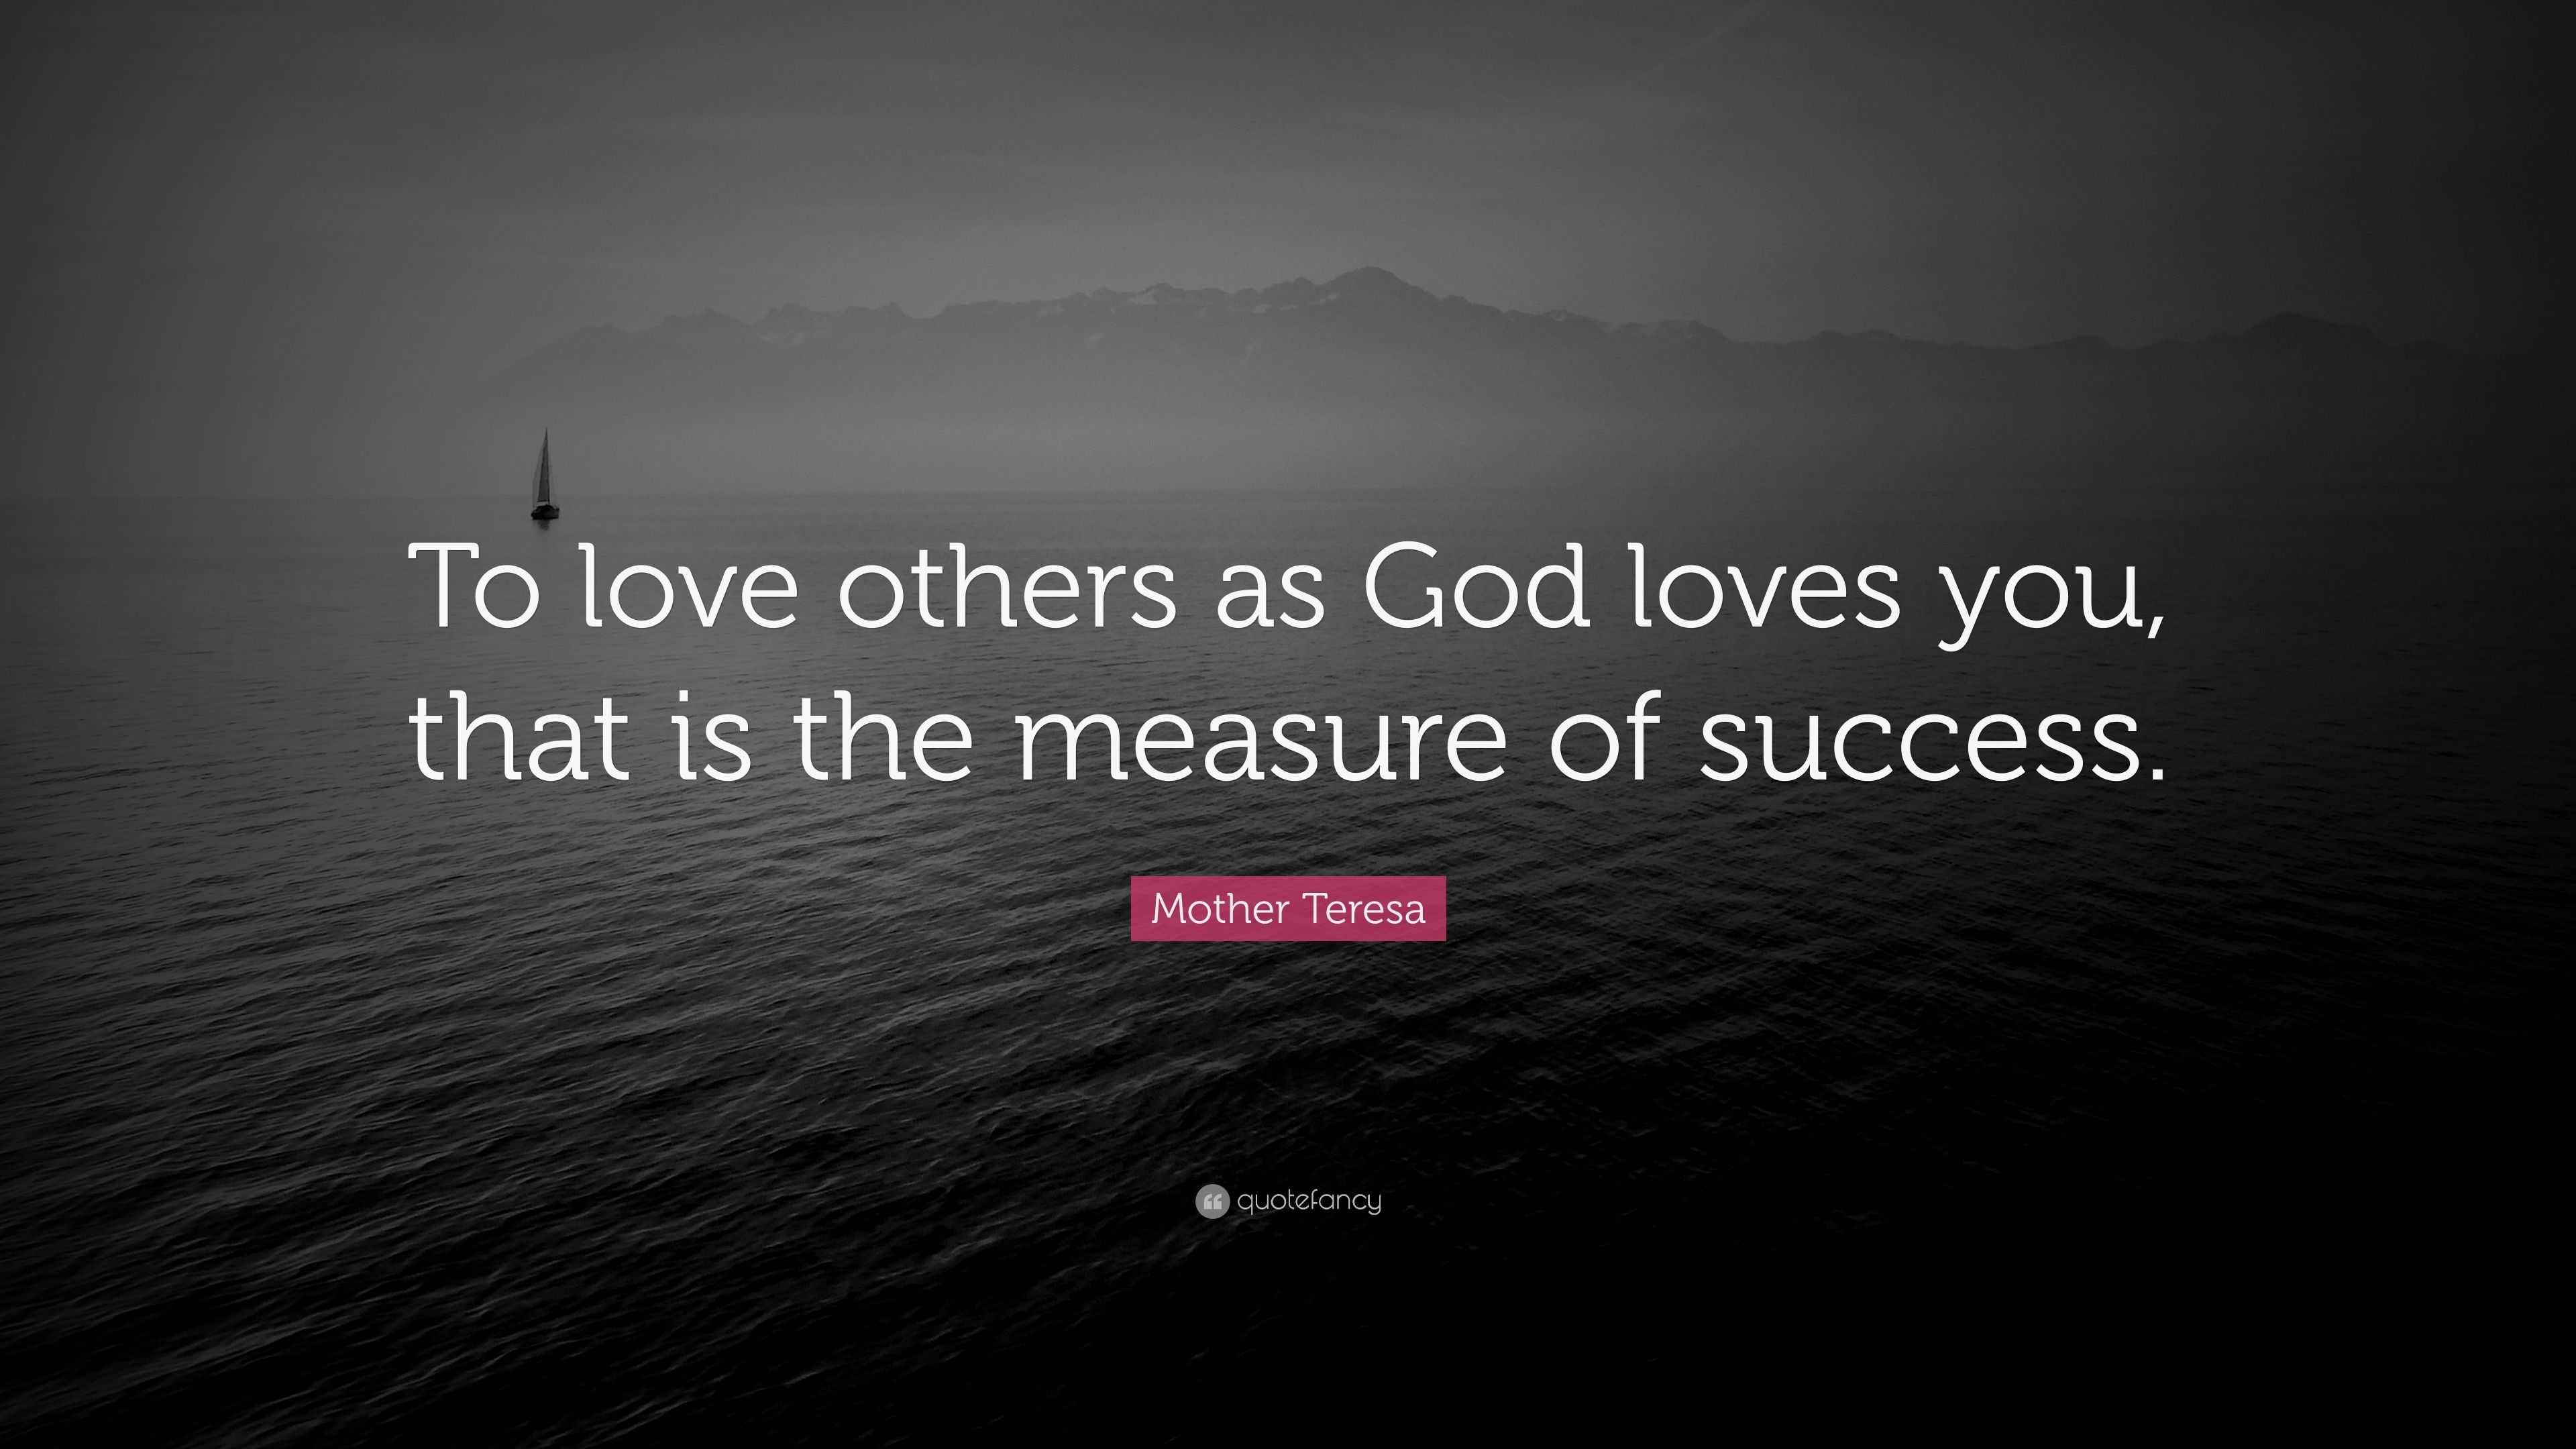 Mother Teresa Quote “To love others as God loves you that is the